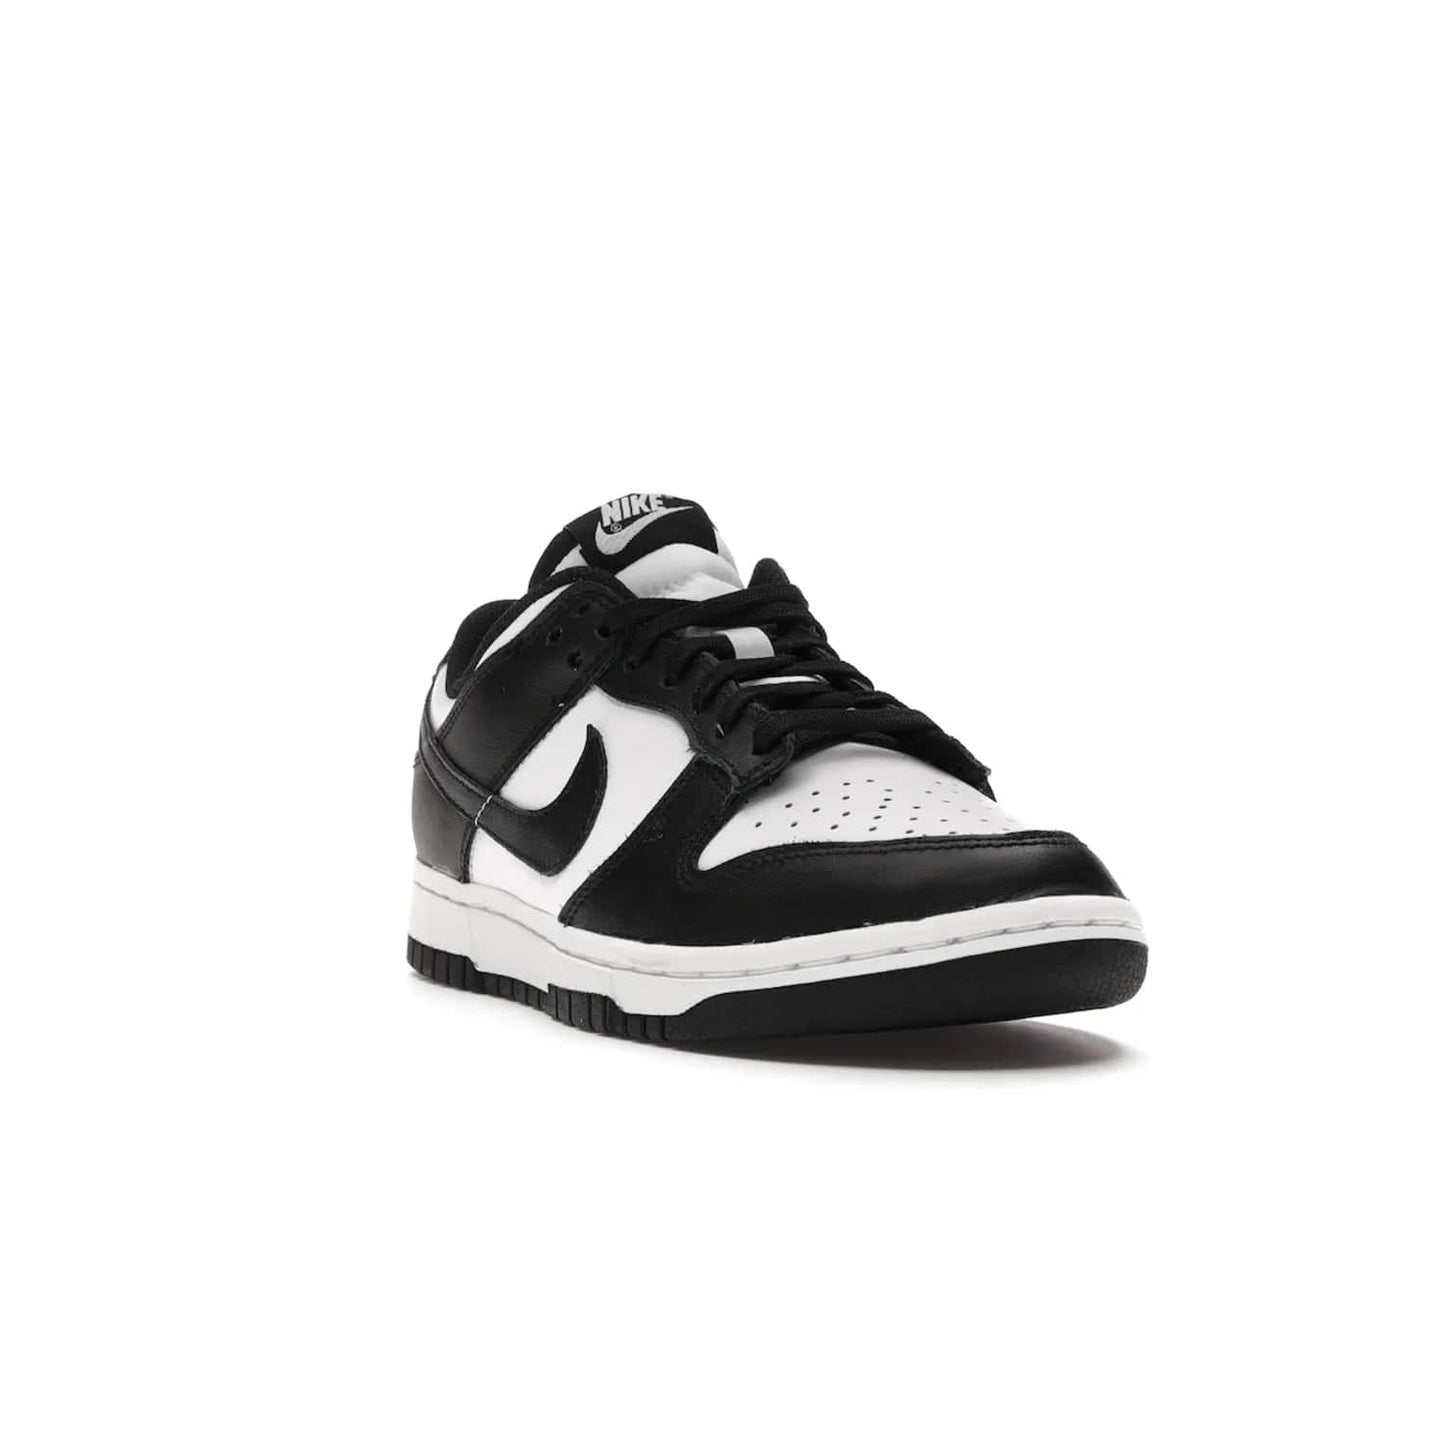 Nike Dunk Low Retro White Black Panda (2021) (Women's) - Image 7 - Only at www.BallersClubKickz.com - Say hello to the new Nike Dunk Low Retro White Black Panda (2021) (Women's)! White & black leather upper with Nike Swoosh logo. Get your pair for $100 in March 2021! Shop now!